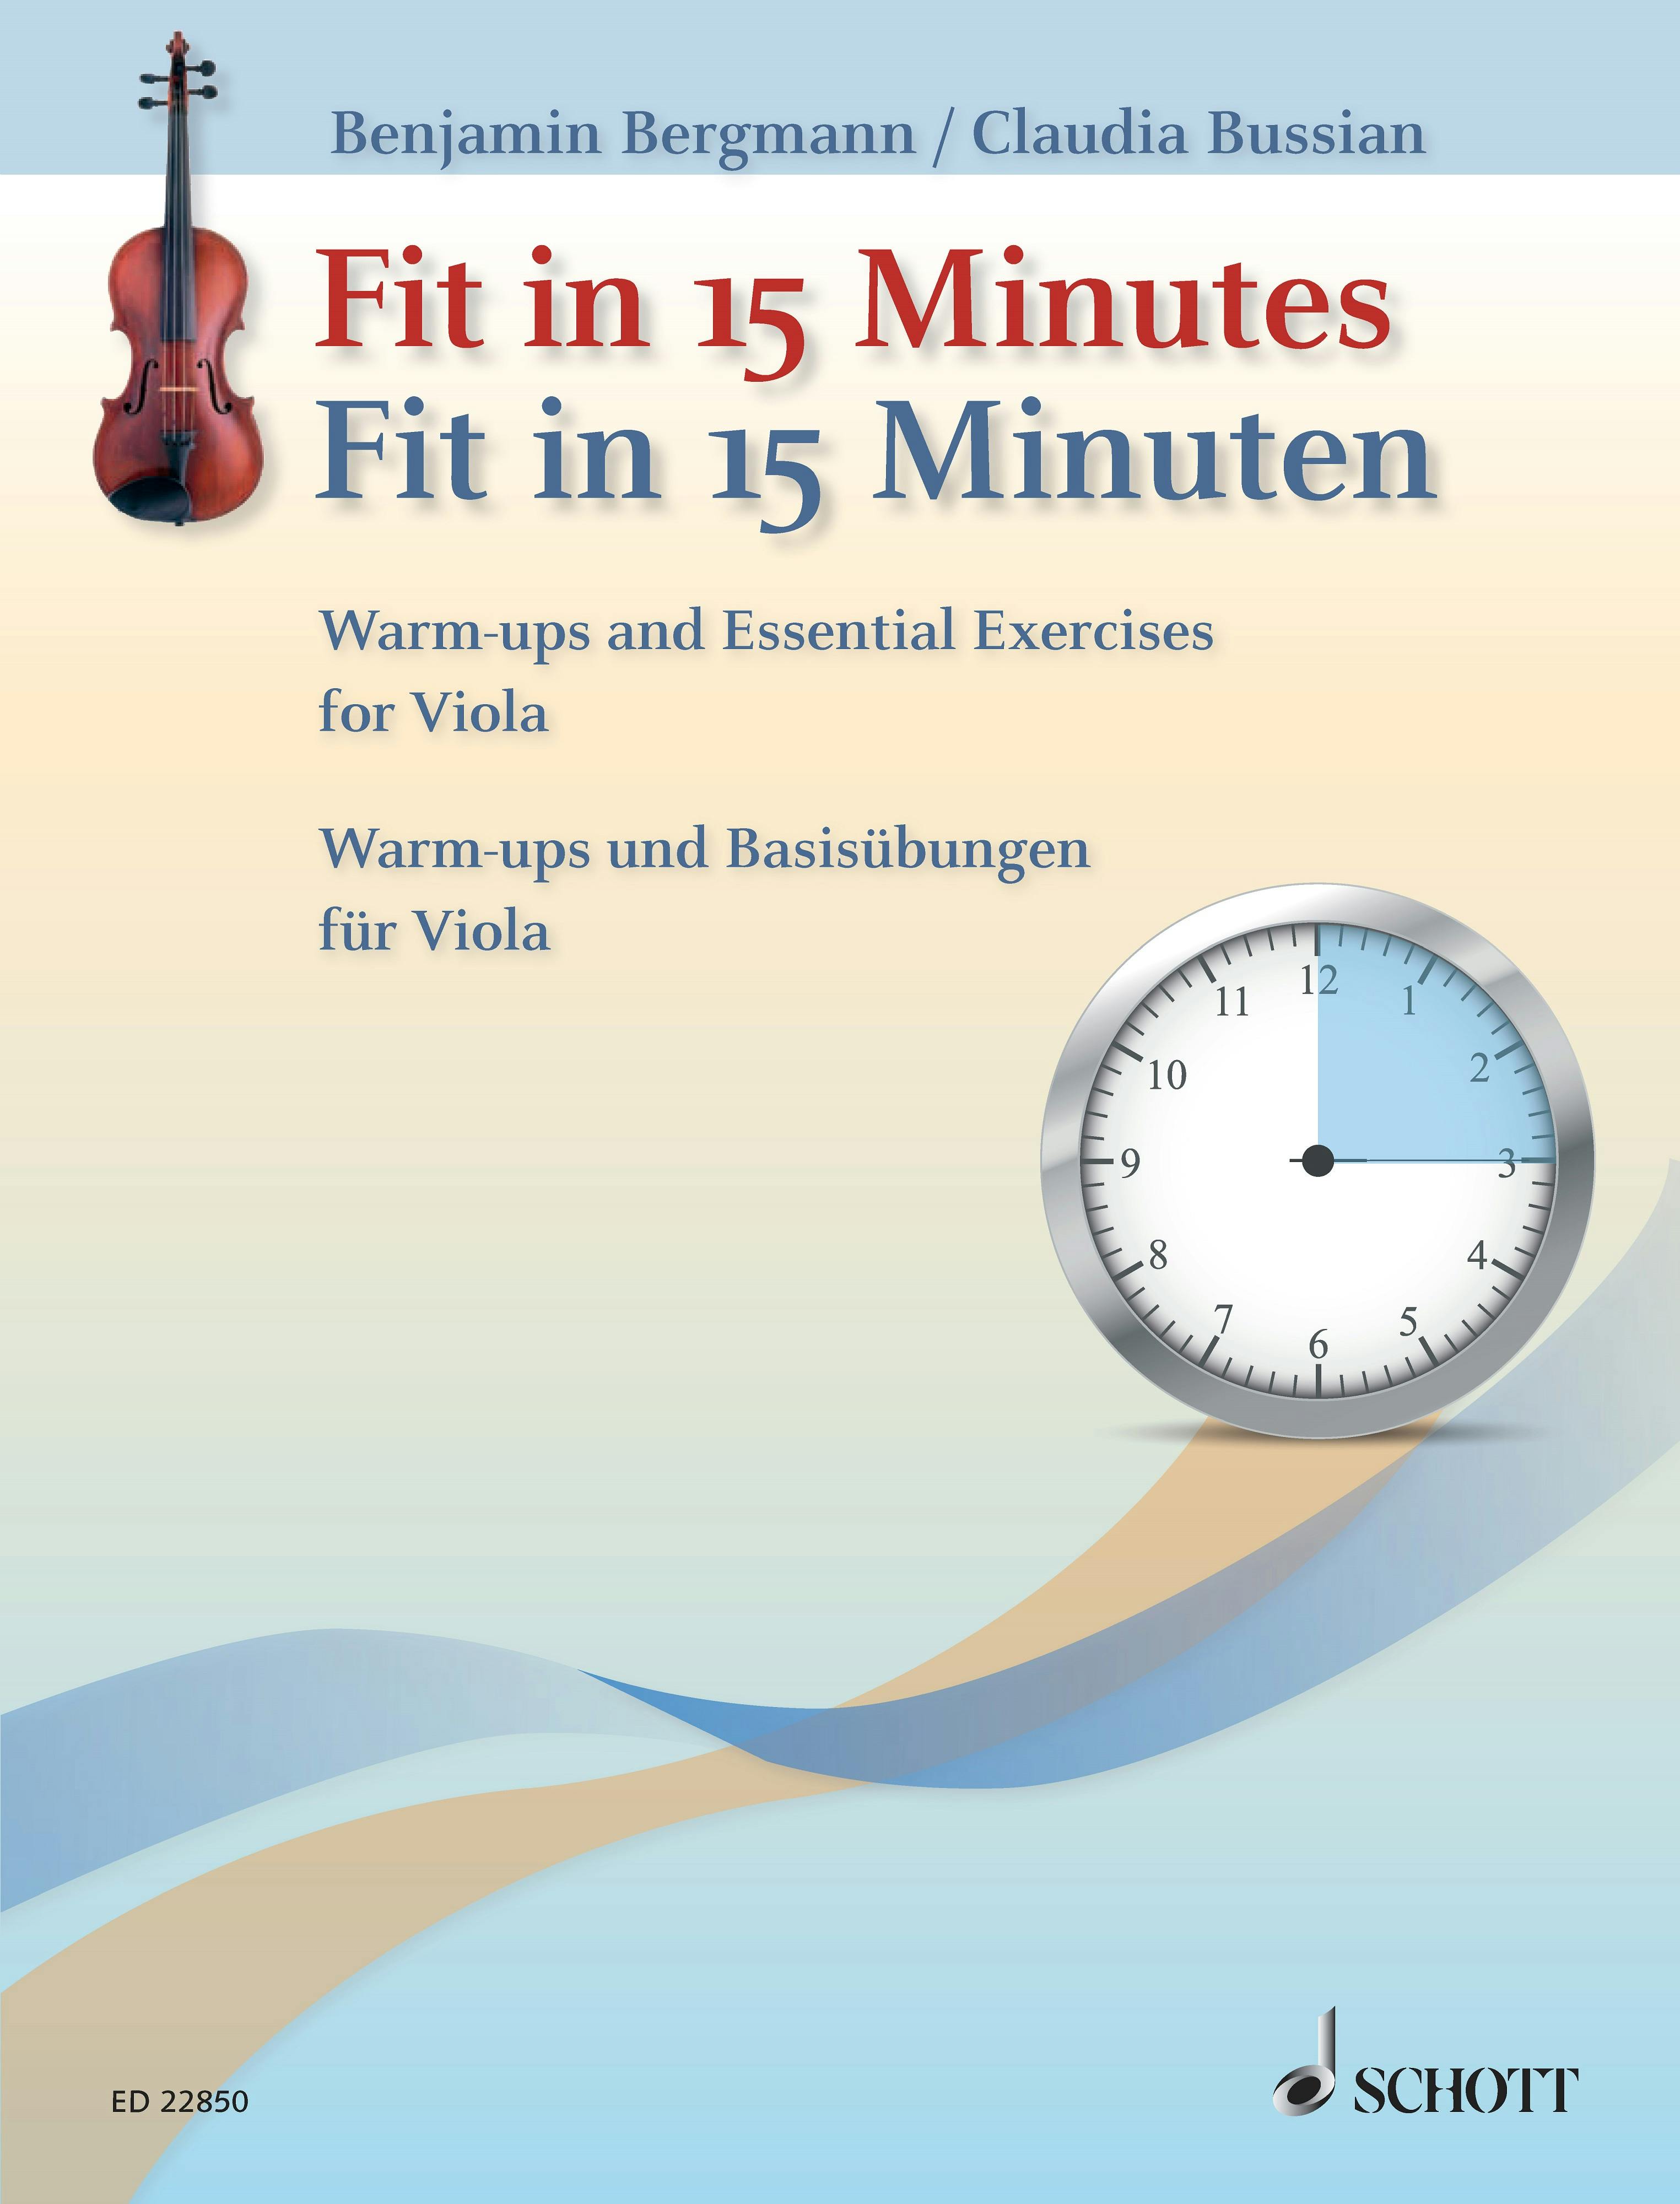 Fit in 15 Minutes: Warm-ups and Essential Exercises for Viola - Claudia Bussian, Benjamin Bergmann